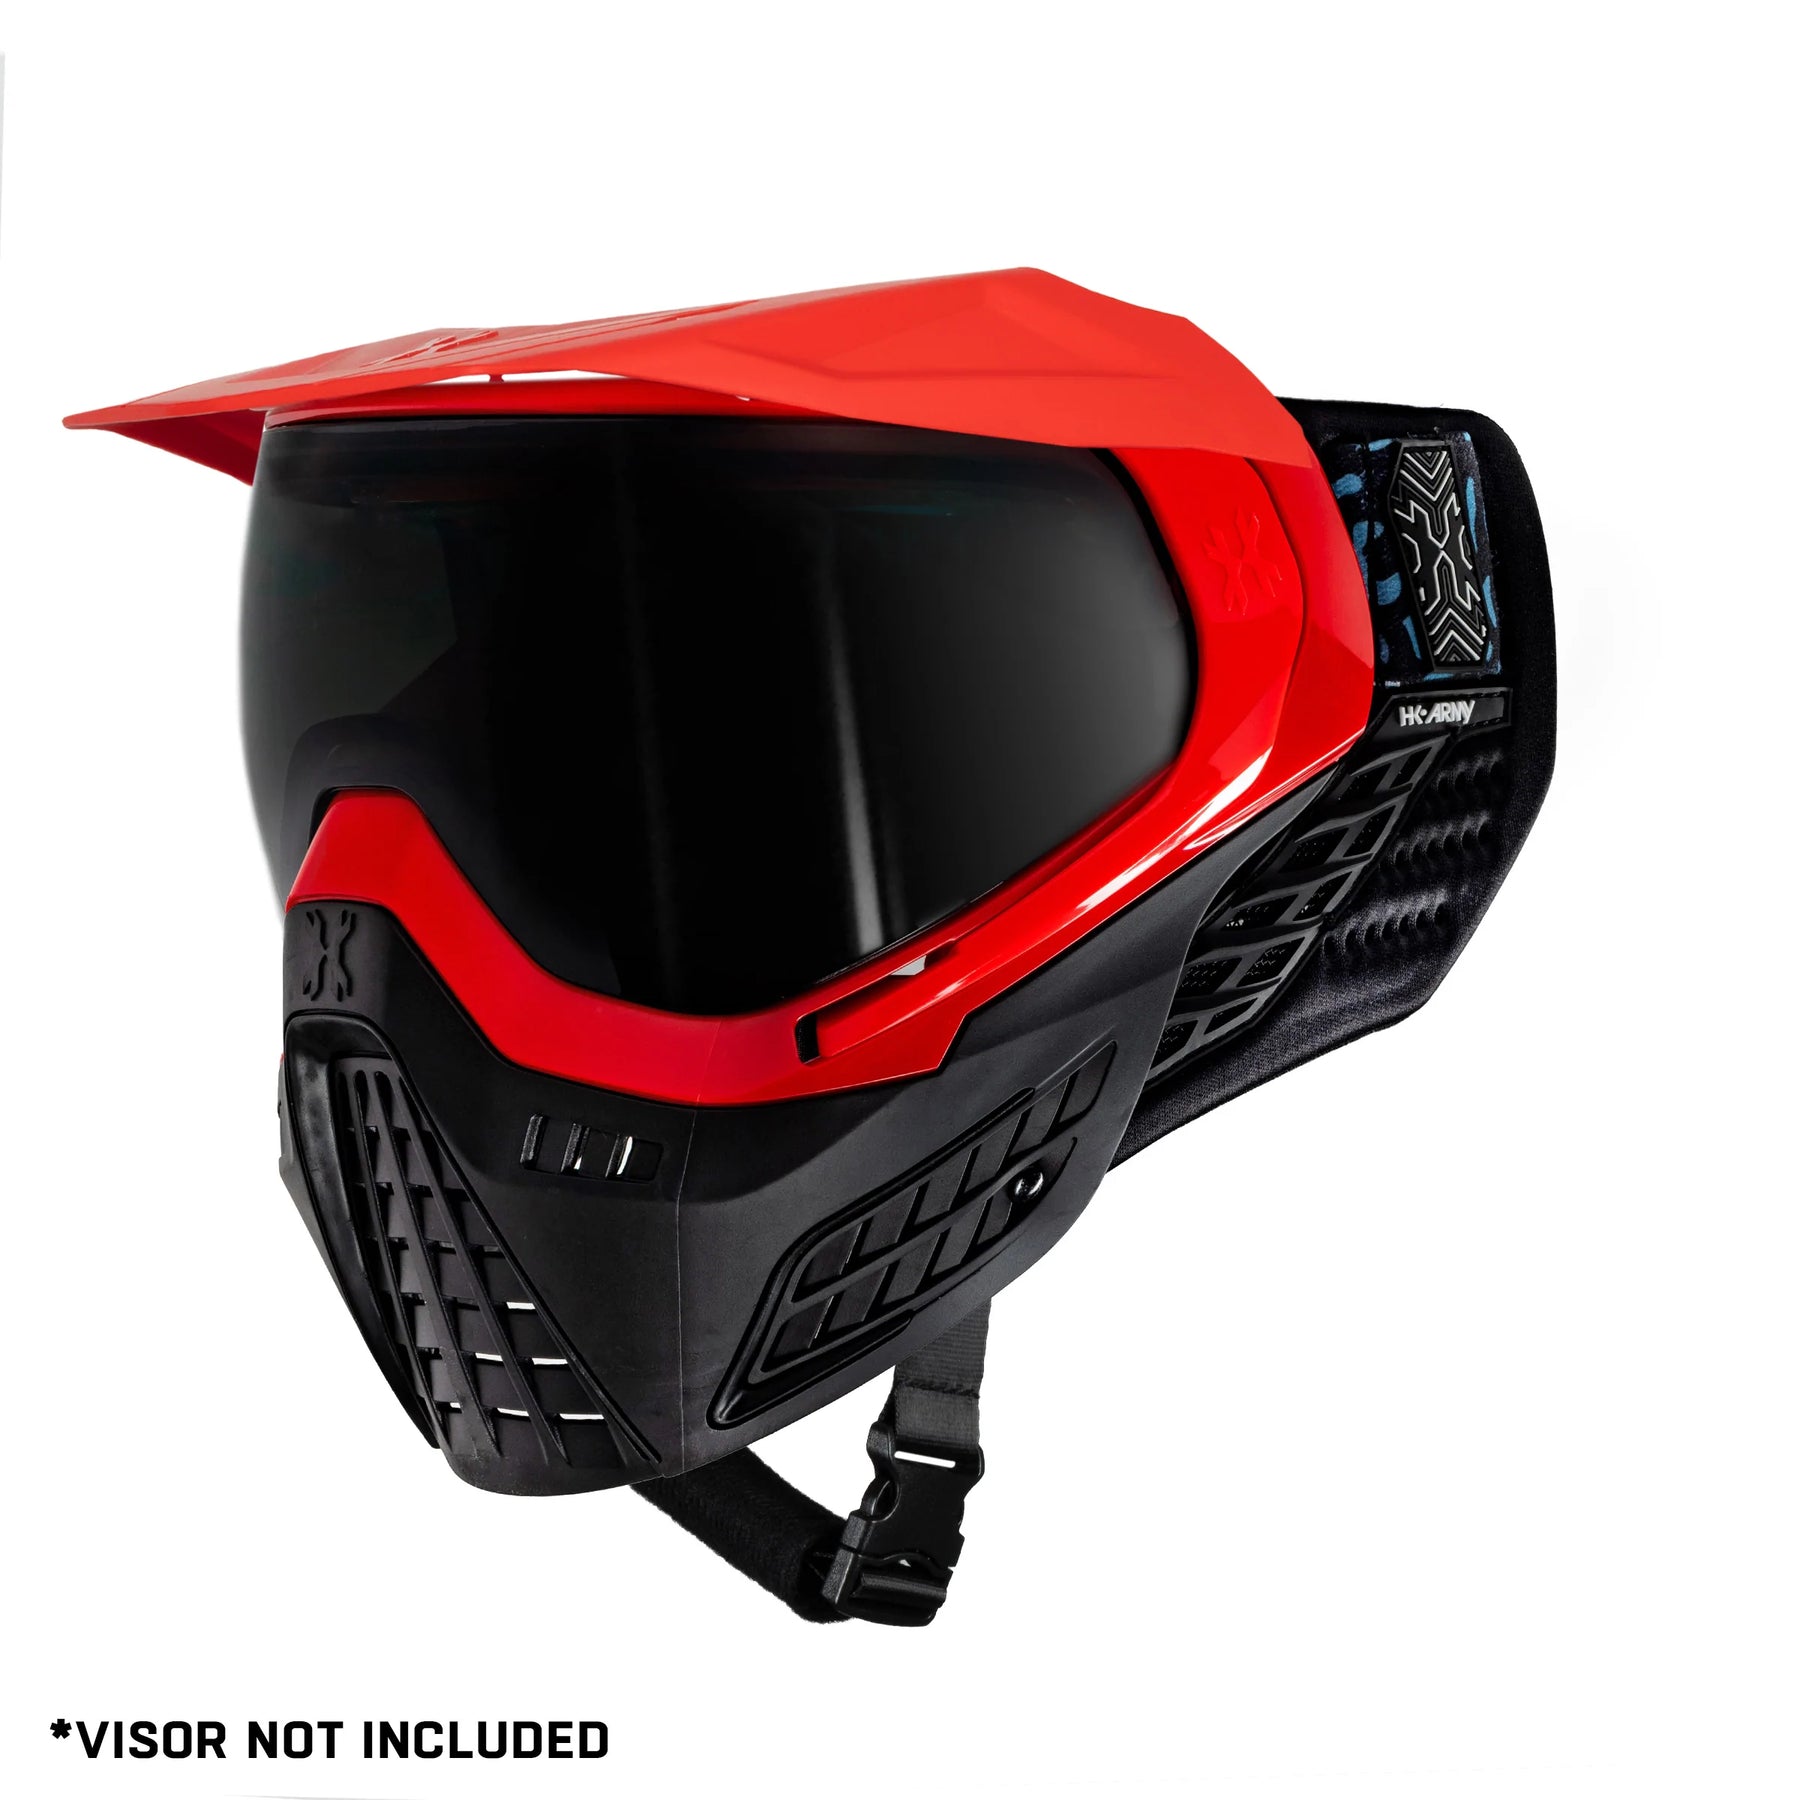 Klr Goggle Blackout Red (Red/Black) | Paintball Goggle | Mask | Hk Army